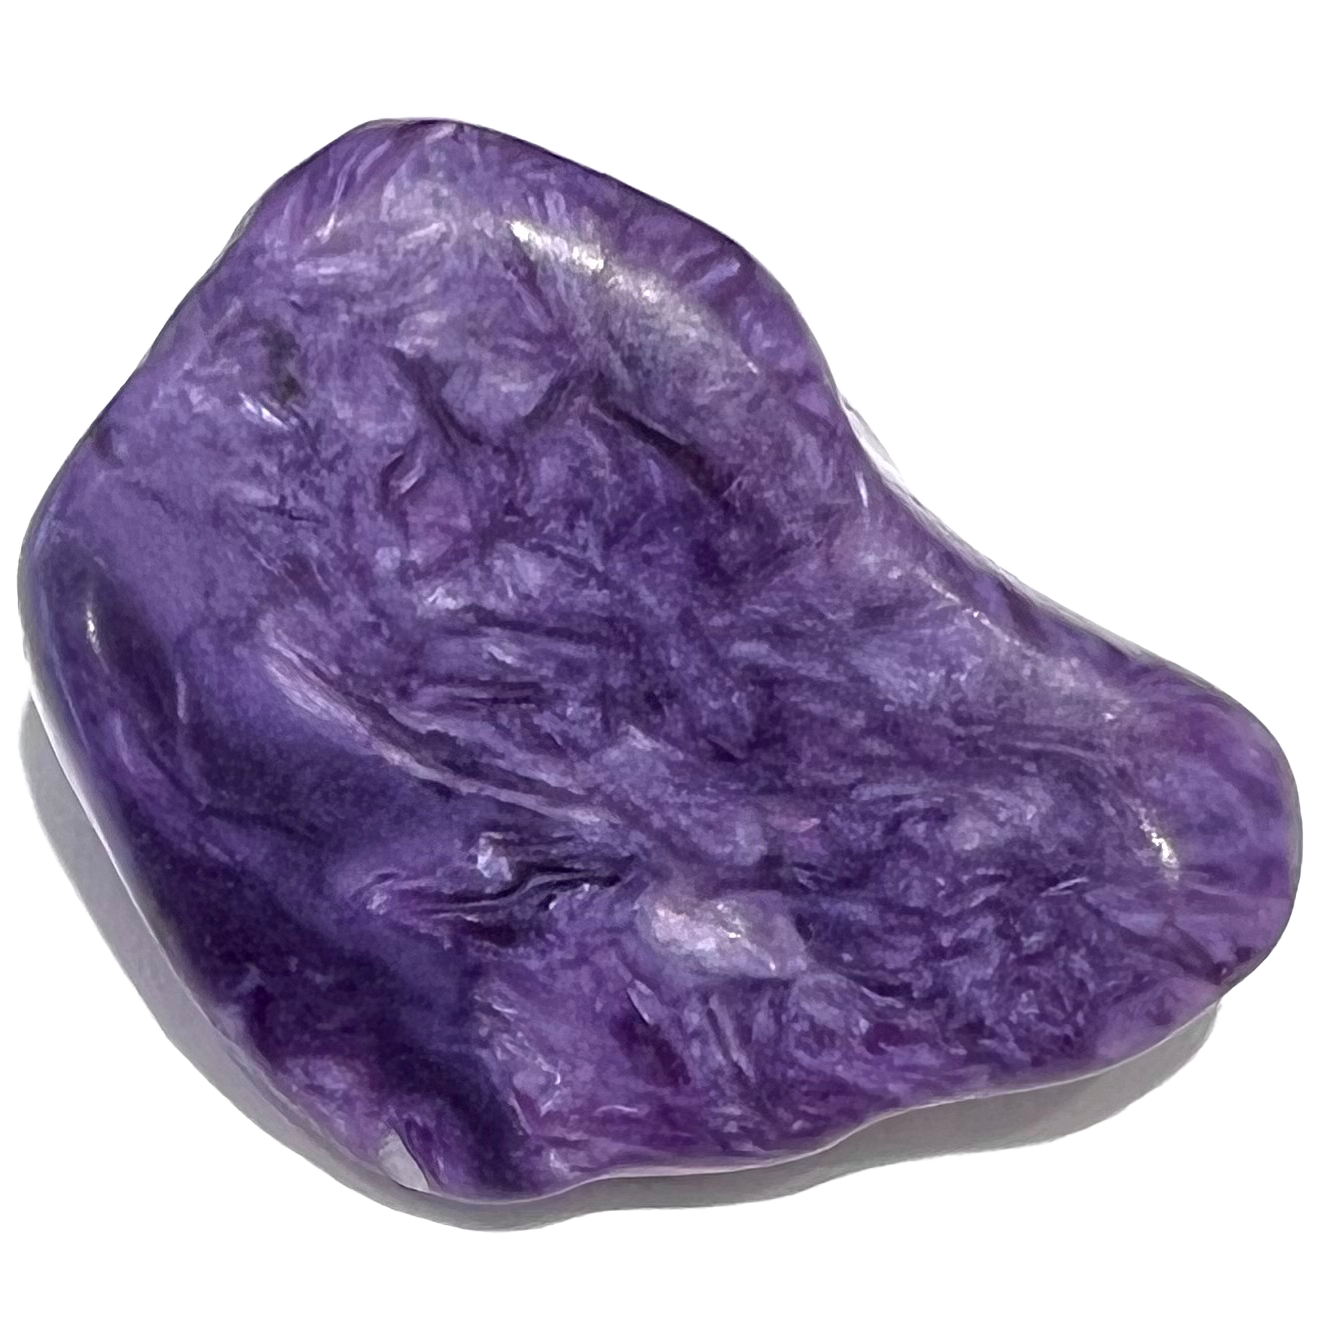 A tumble polished charoite stone.  The material is naturally stained purple, white, and black.